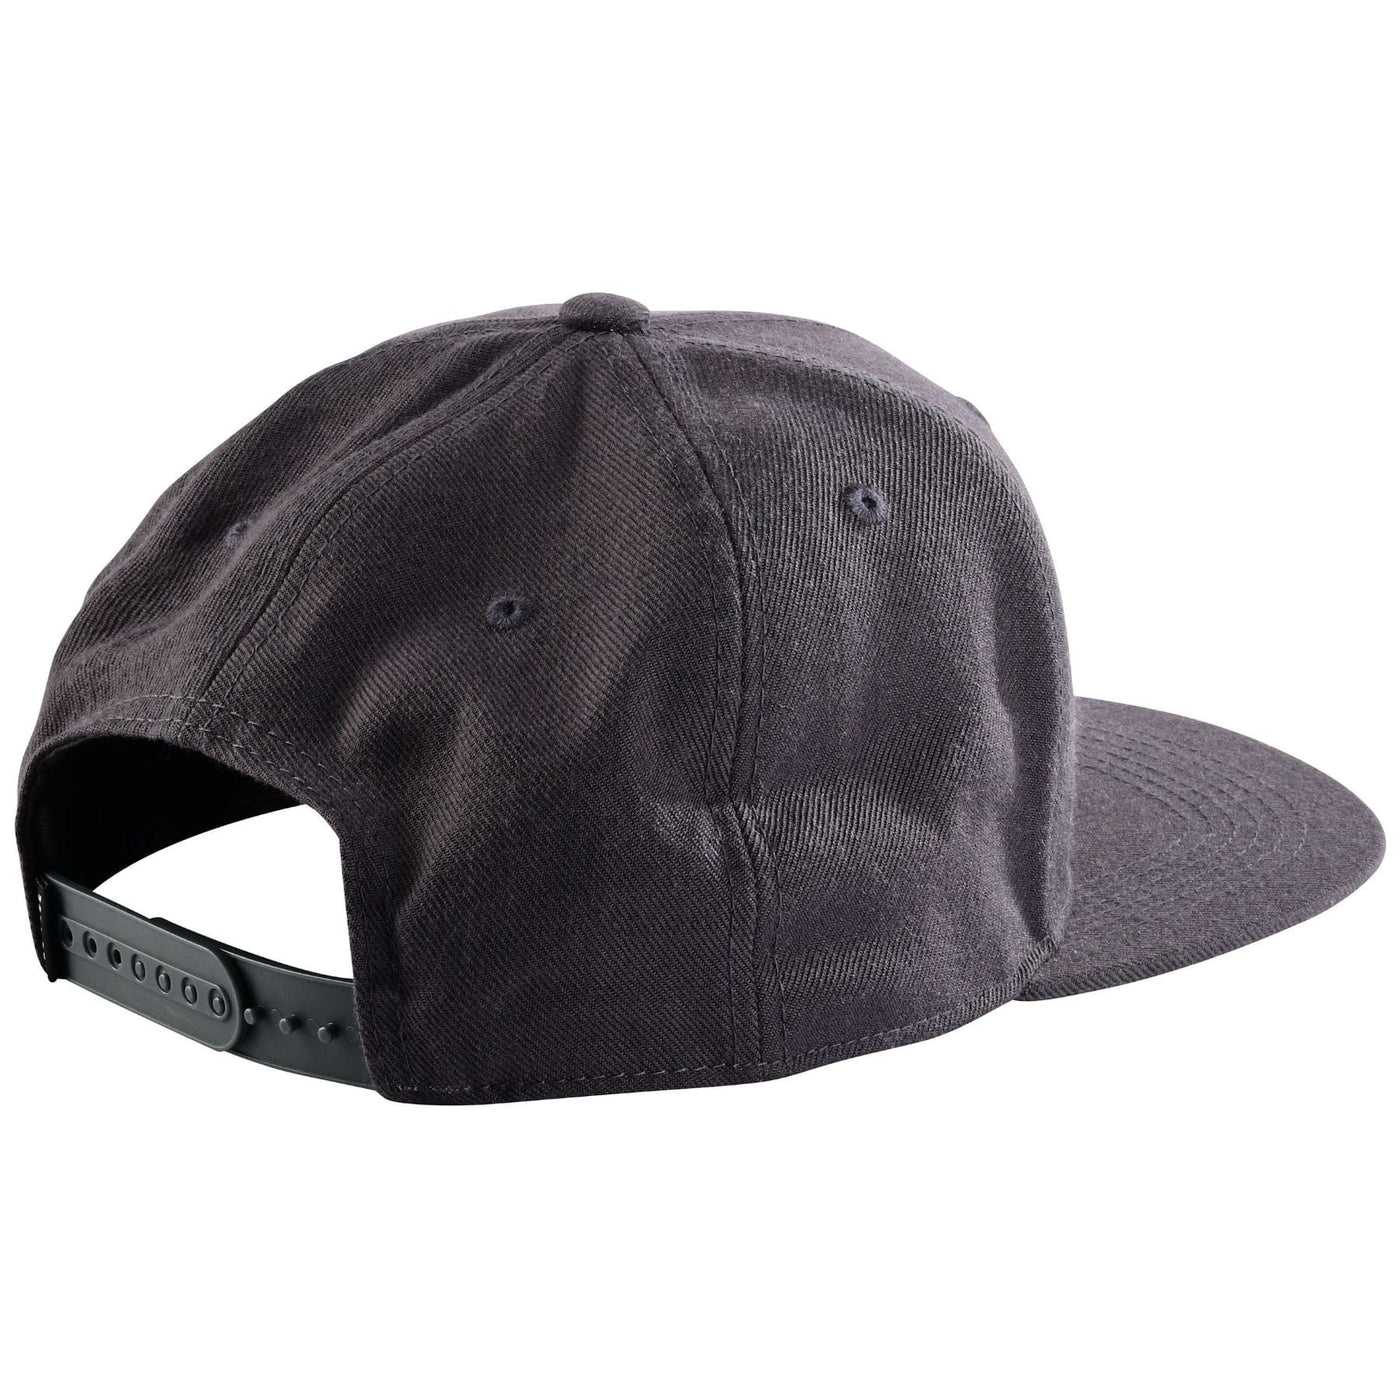 Troy Lee Designs 9FIFTY Slice Snapback Hat - Dark Gray/Charcoal 8Lines Shop - Fast Shipping